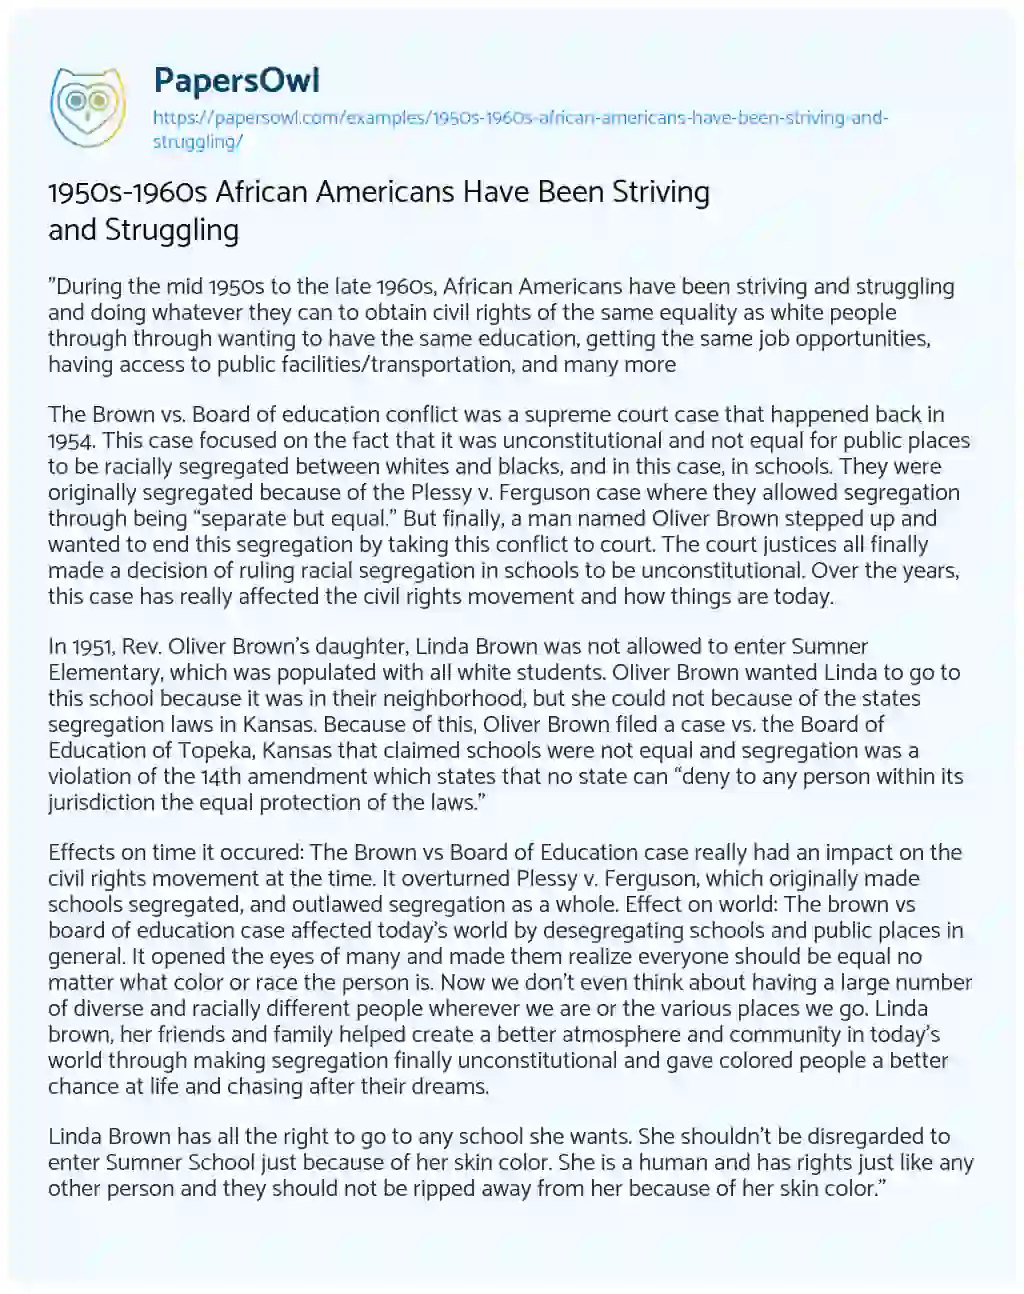 Essay on 1950s-1960s African Americans have been Striving and Struggling